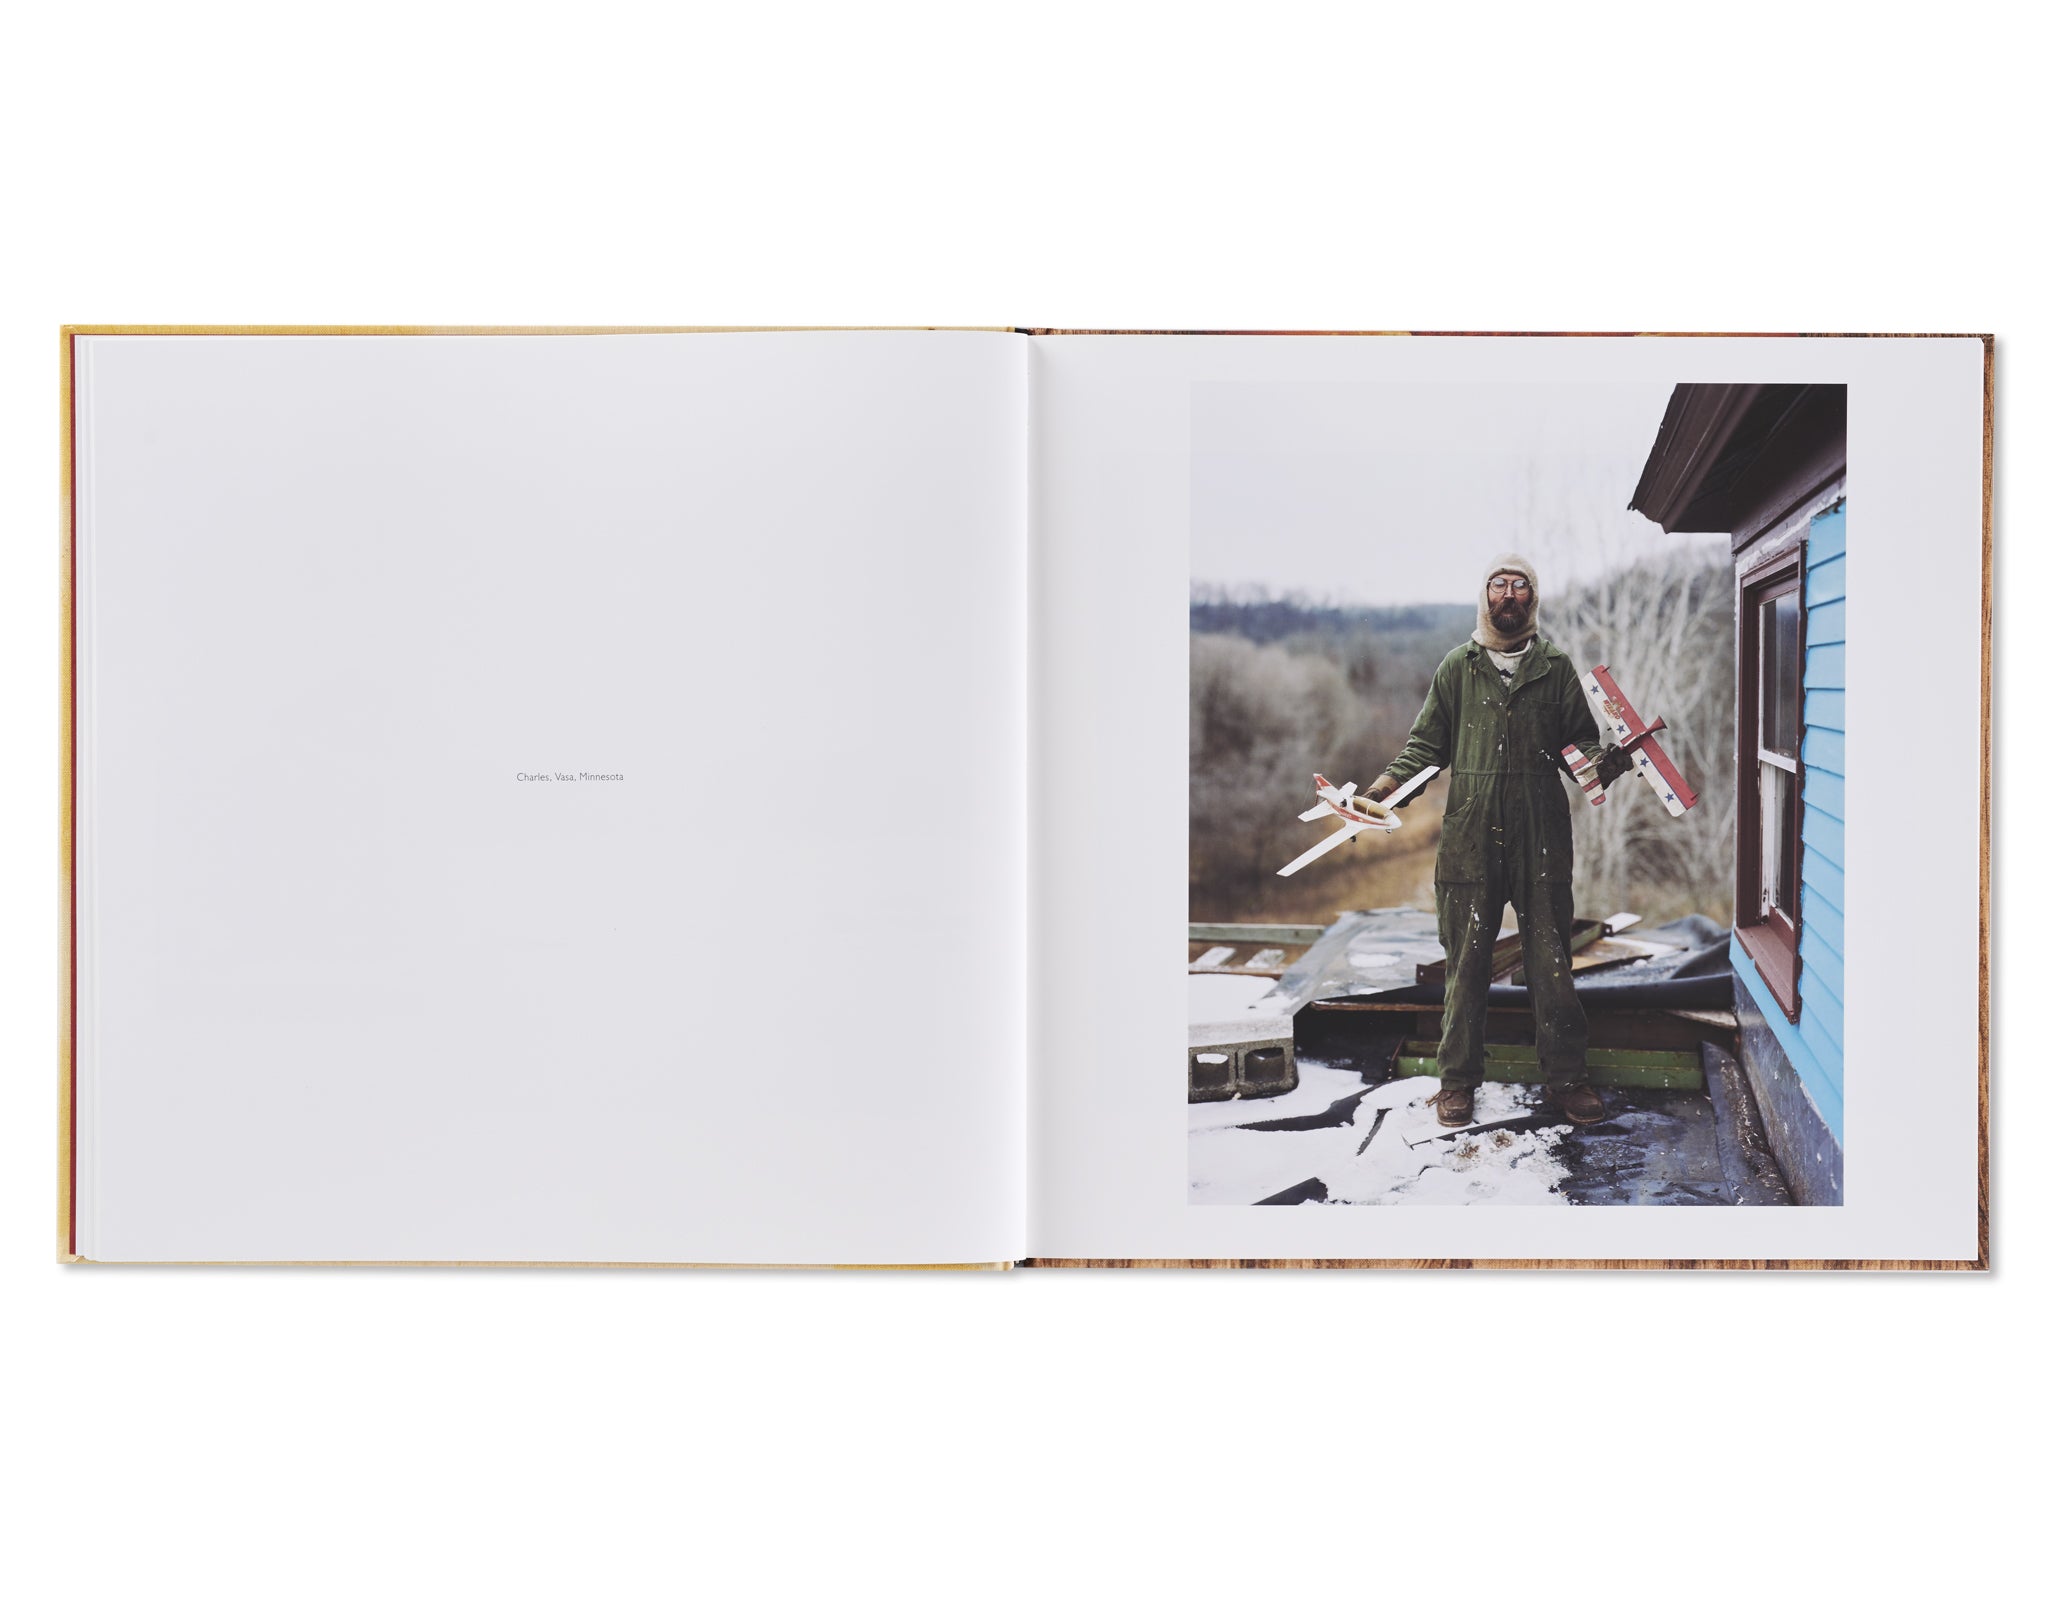 SLEEPING BY THE MISSISSIPPI by Alec Soth [SIGNED]